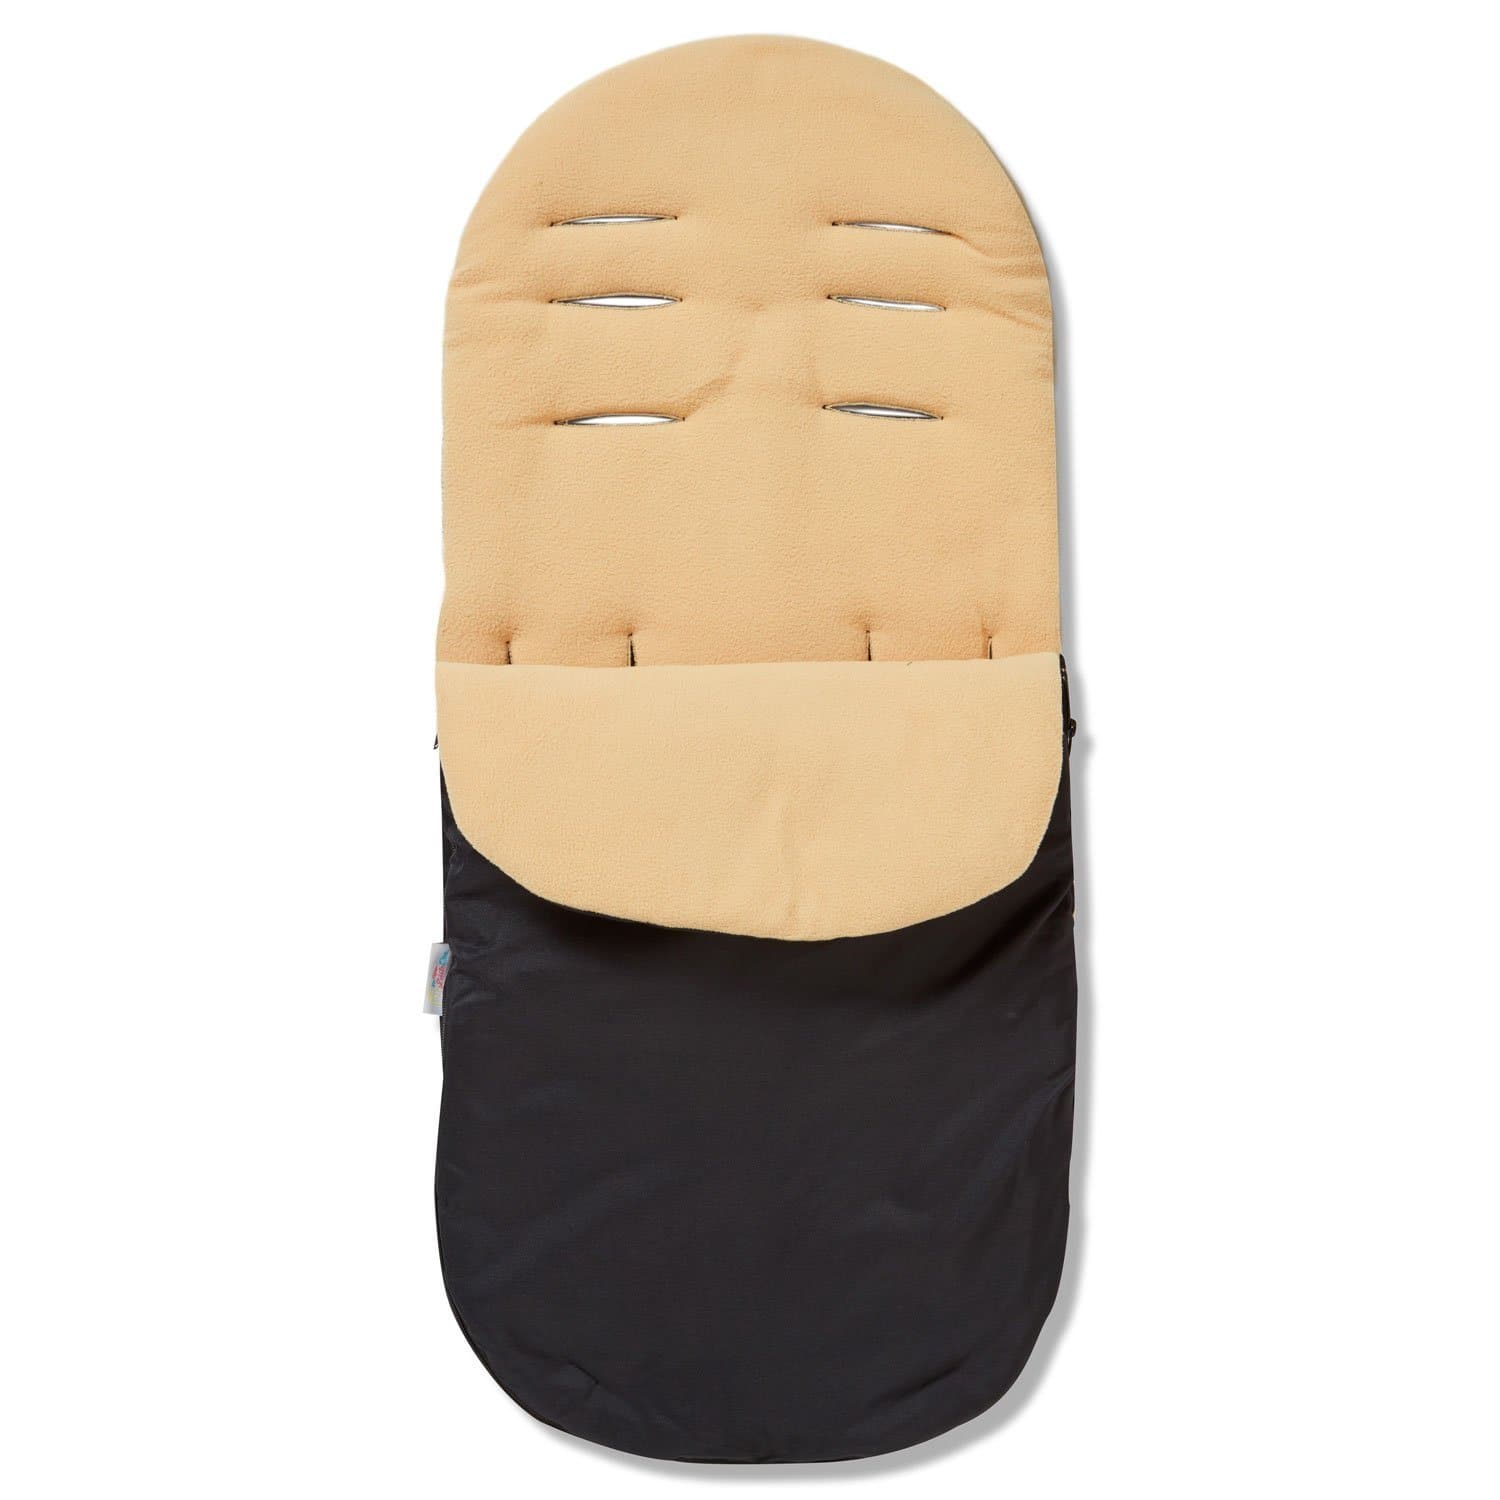 Footmuff / Cosy Toes Compatible with Nania - Sand / Fits All Models | For Your Little One